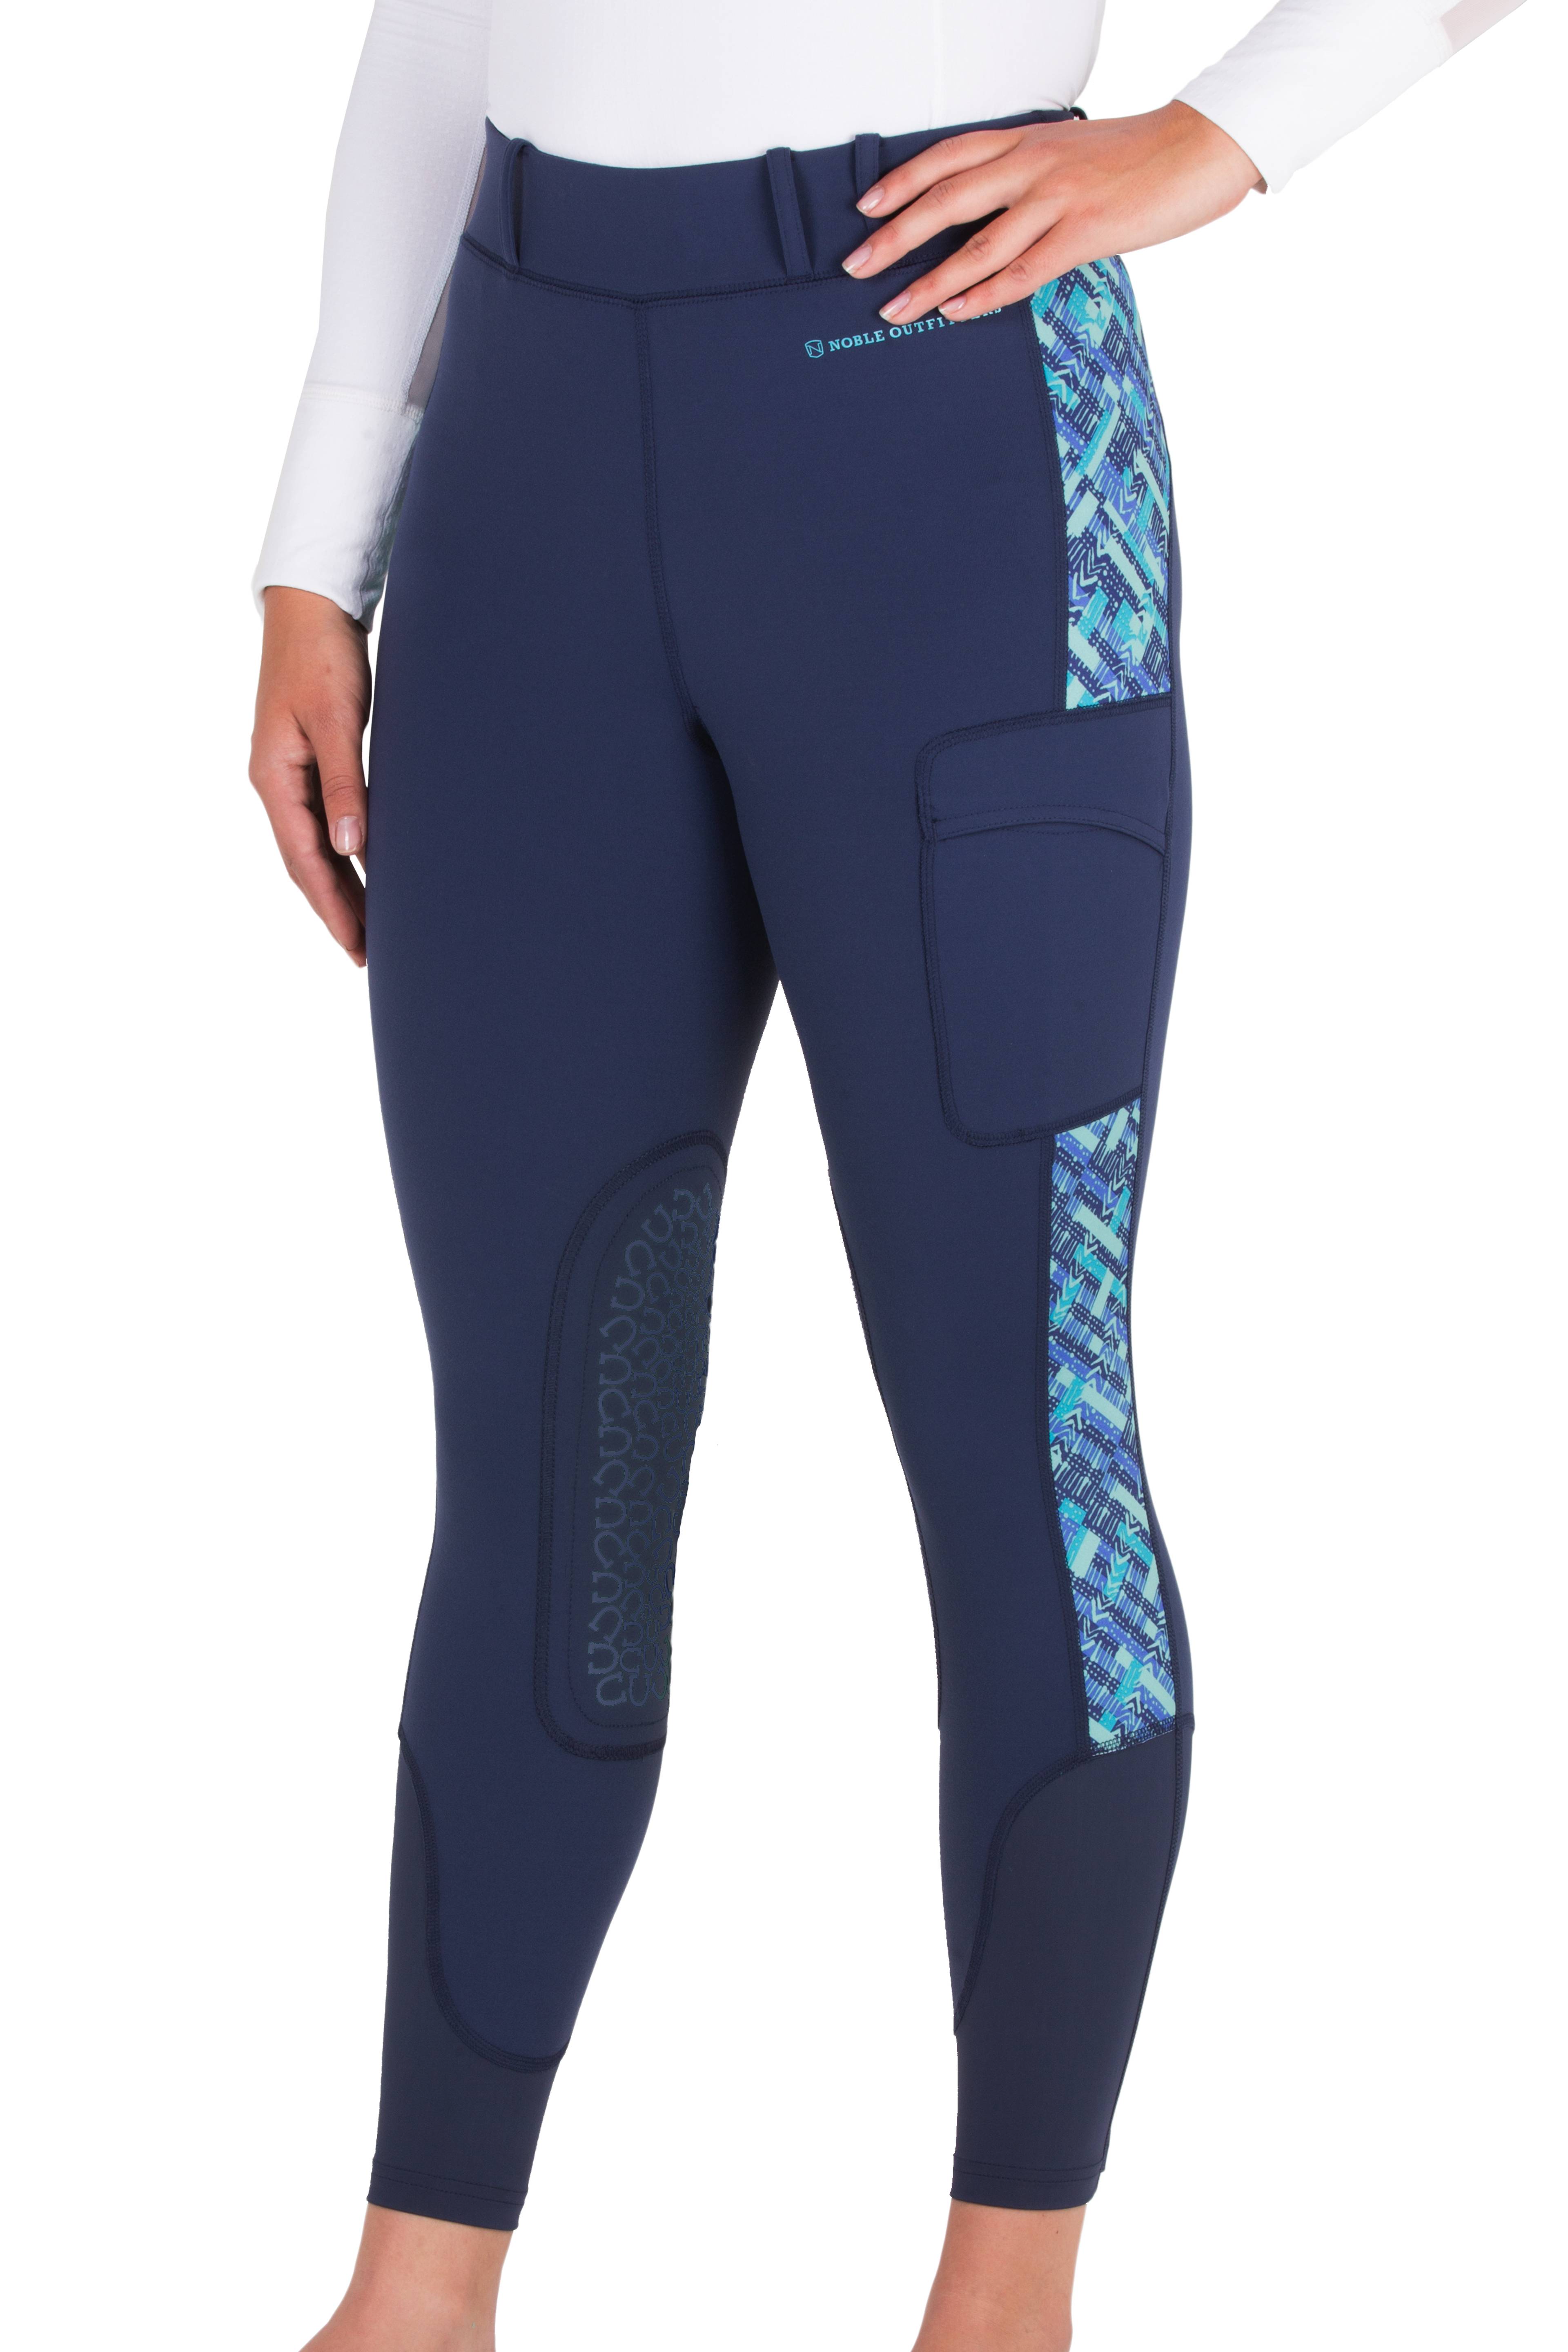 Noble Outfitters Printed Balance Riding Tights - Ladies